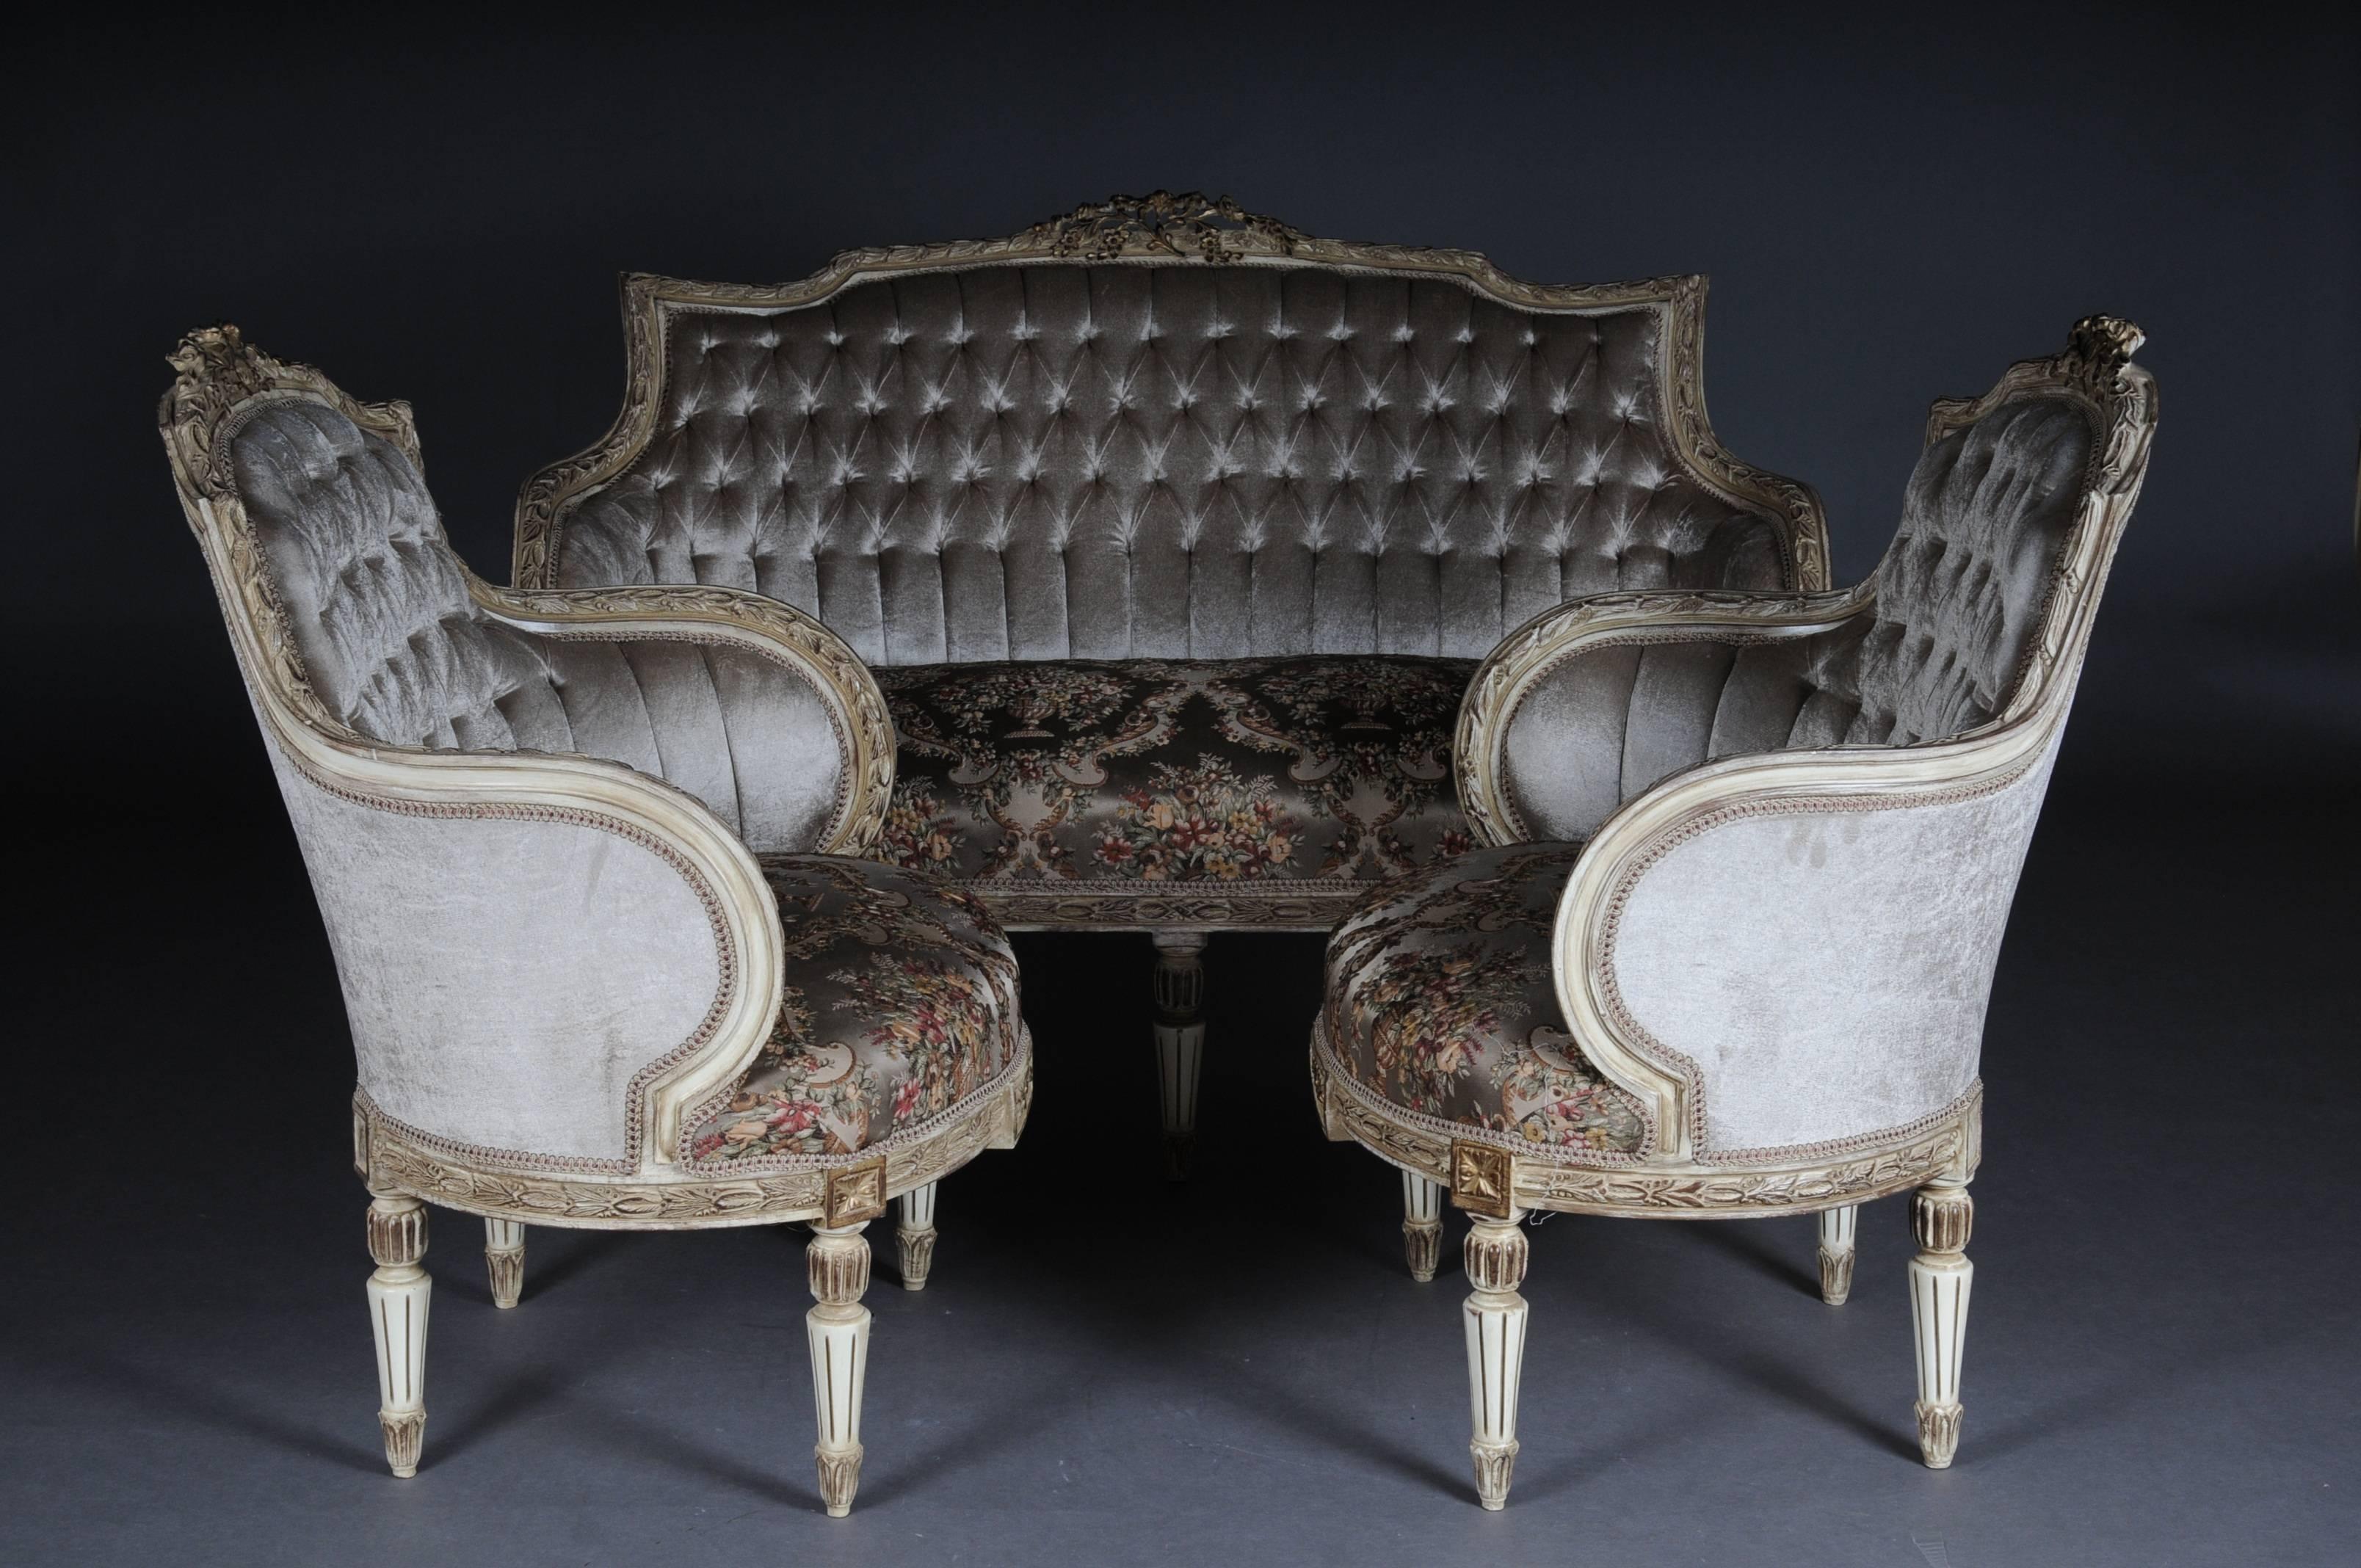 Solid beechwood, carved and partly gold-plated. Semicircular rising backrest framing with rocaille crowning. Profiled frame with richly decorated carving. Profiled frame on conical, fluted legs. Seat and backrest are finished with a historical,